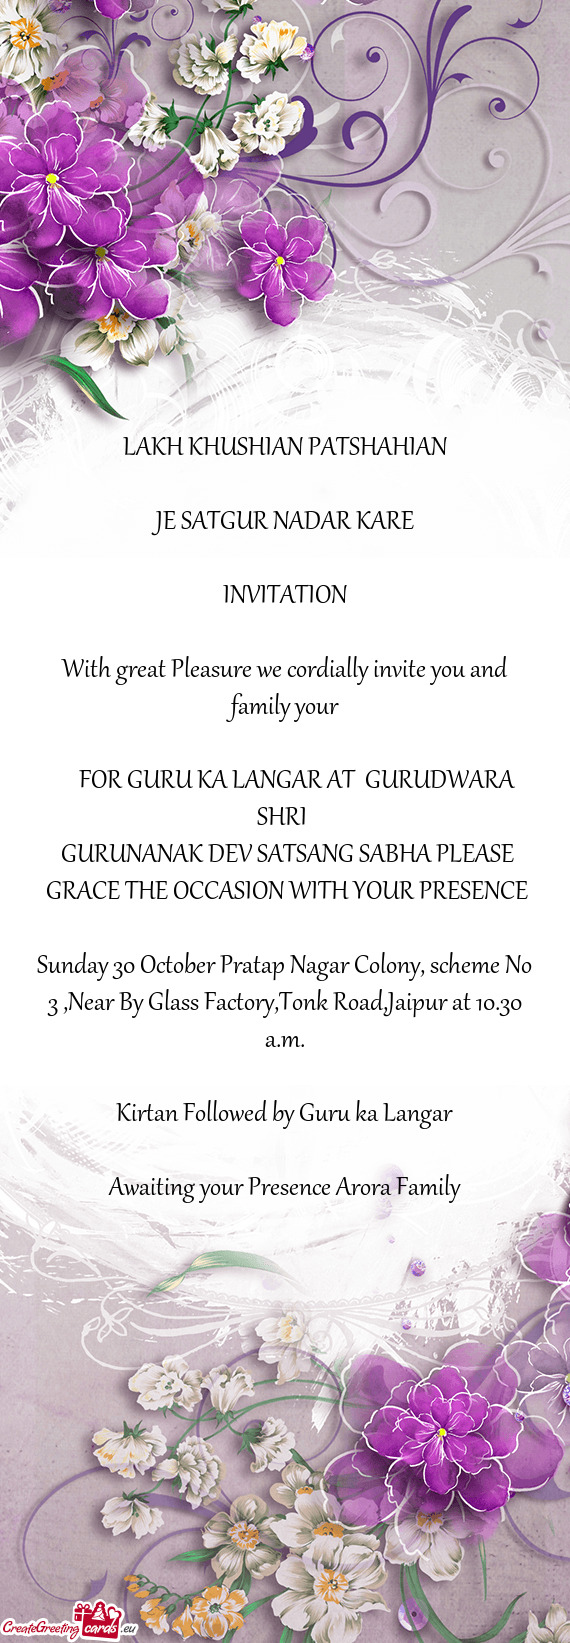 With great Pleasure we cordially invite you and family your